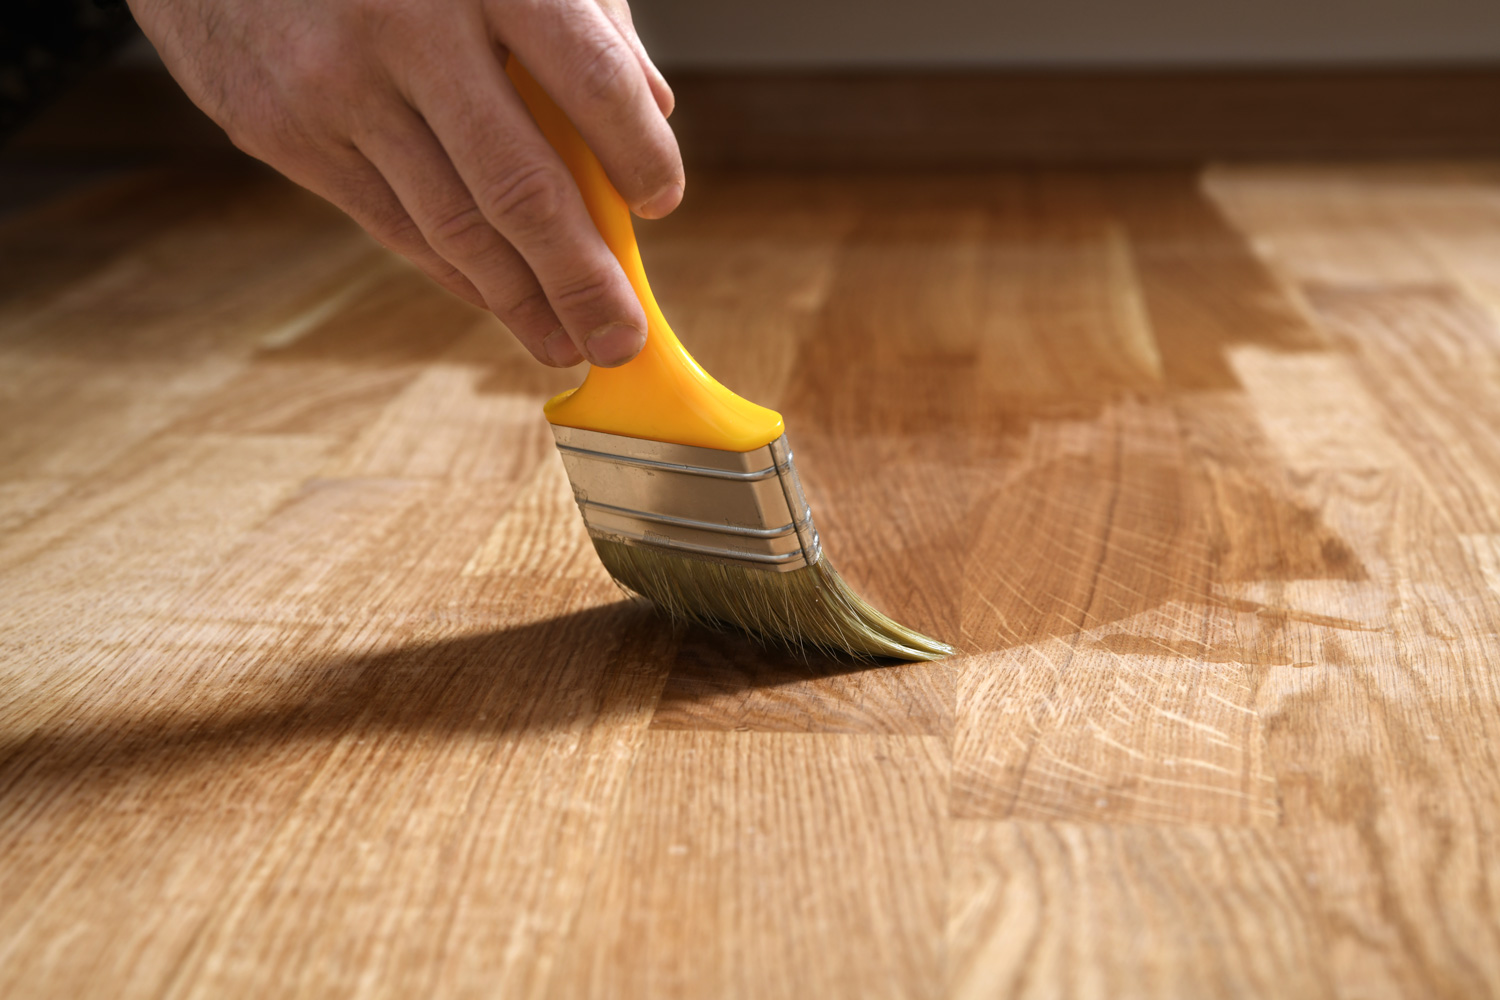 Varnishing lacquering parquet floor by paintbrush 